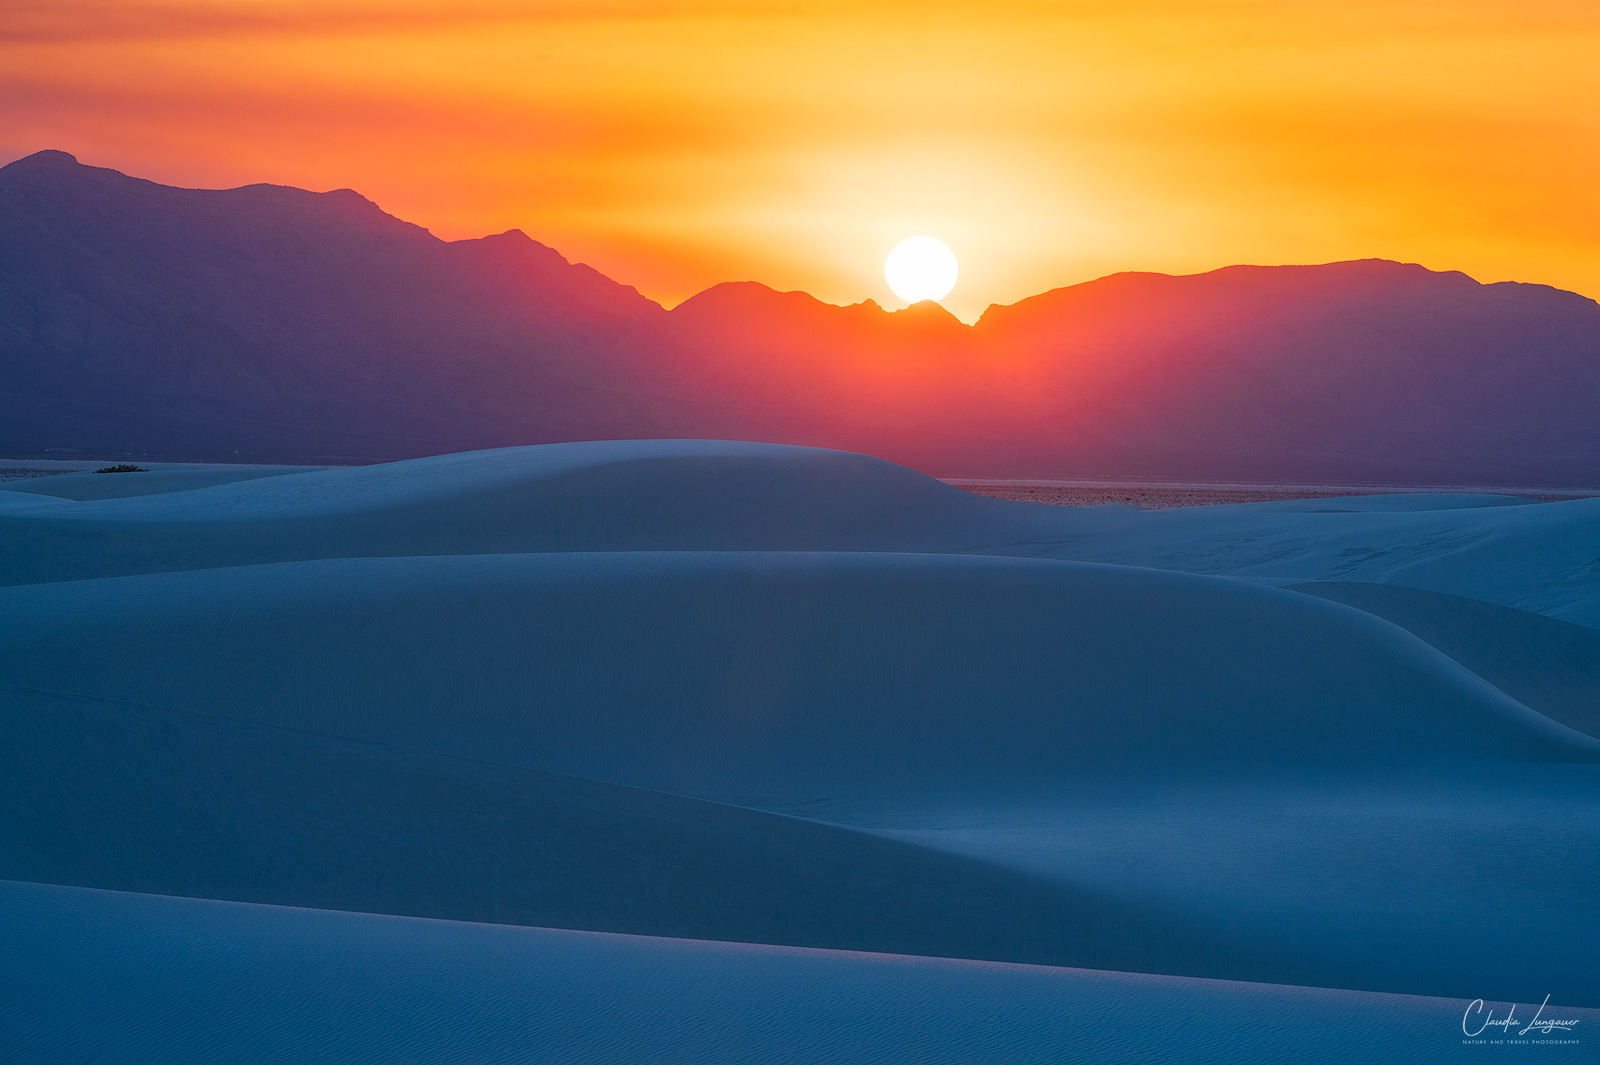 Sunset at White Sands National Park in New Mexico.